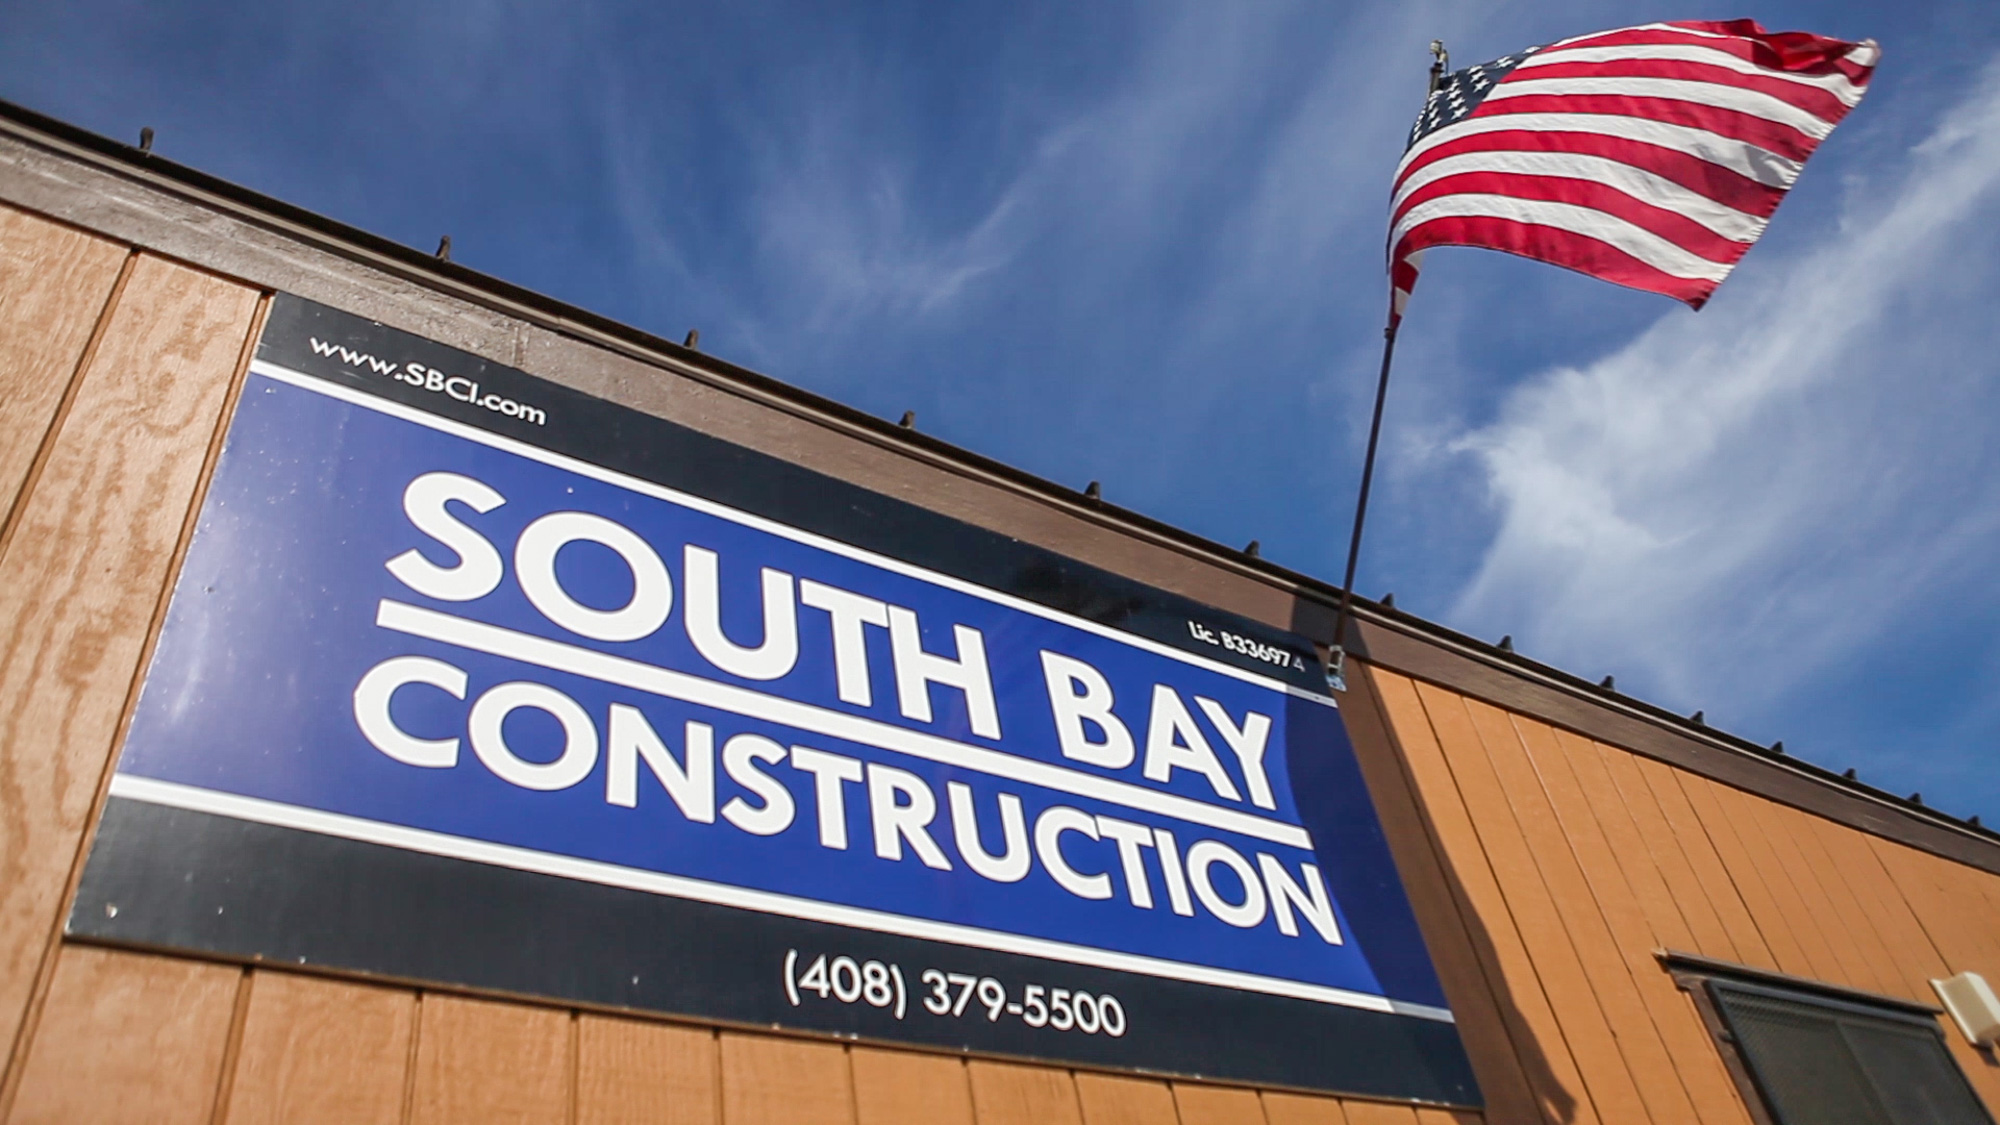 southbay-construction